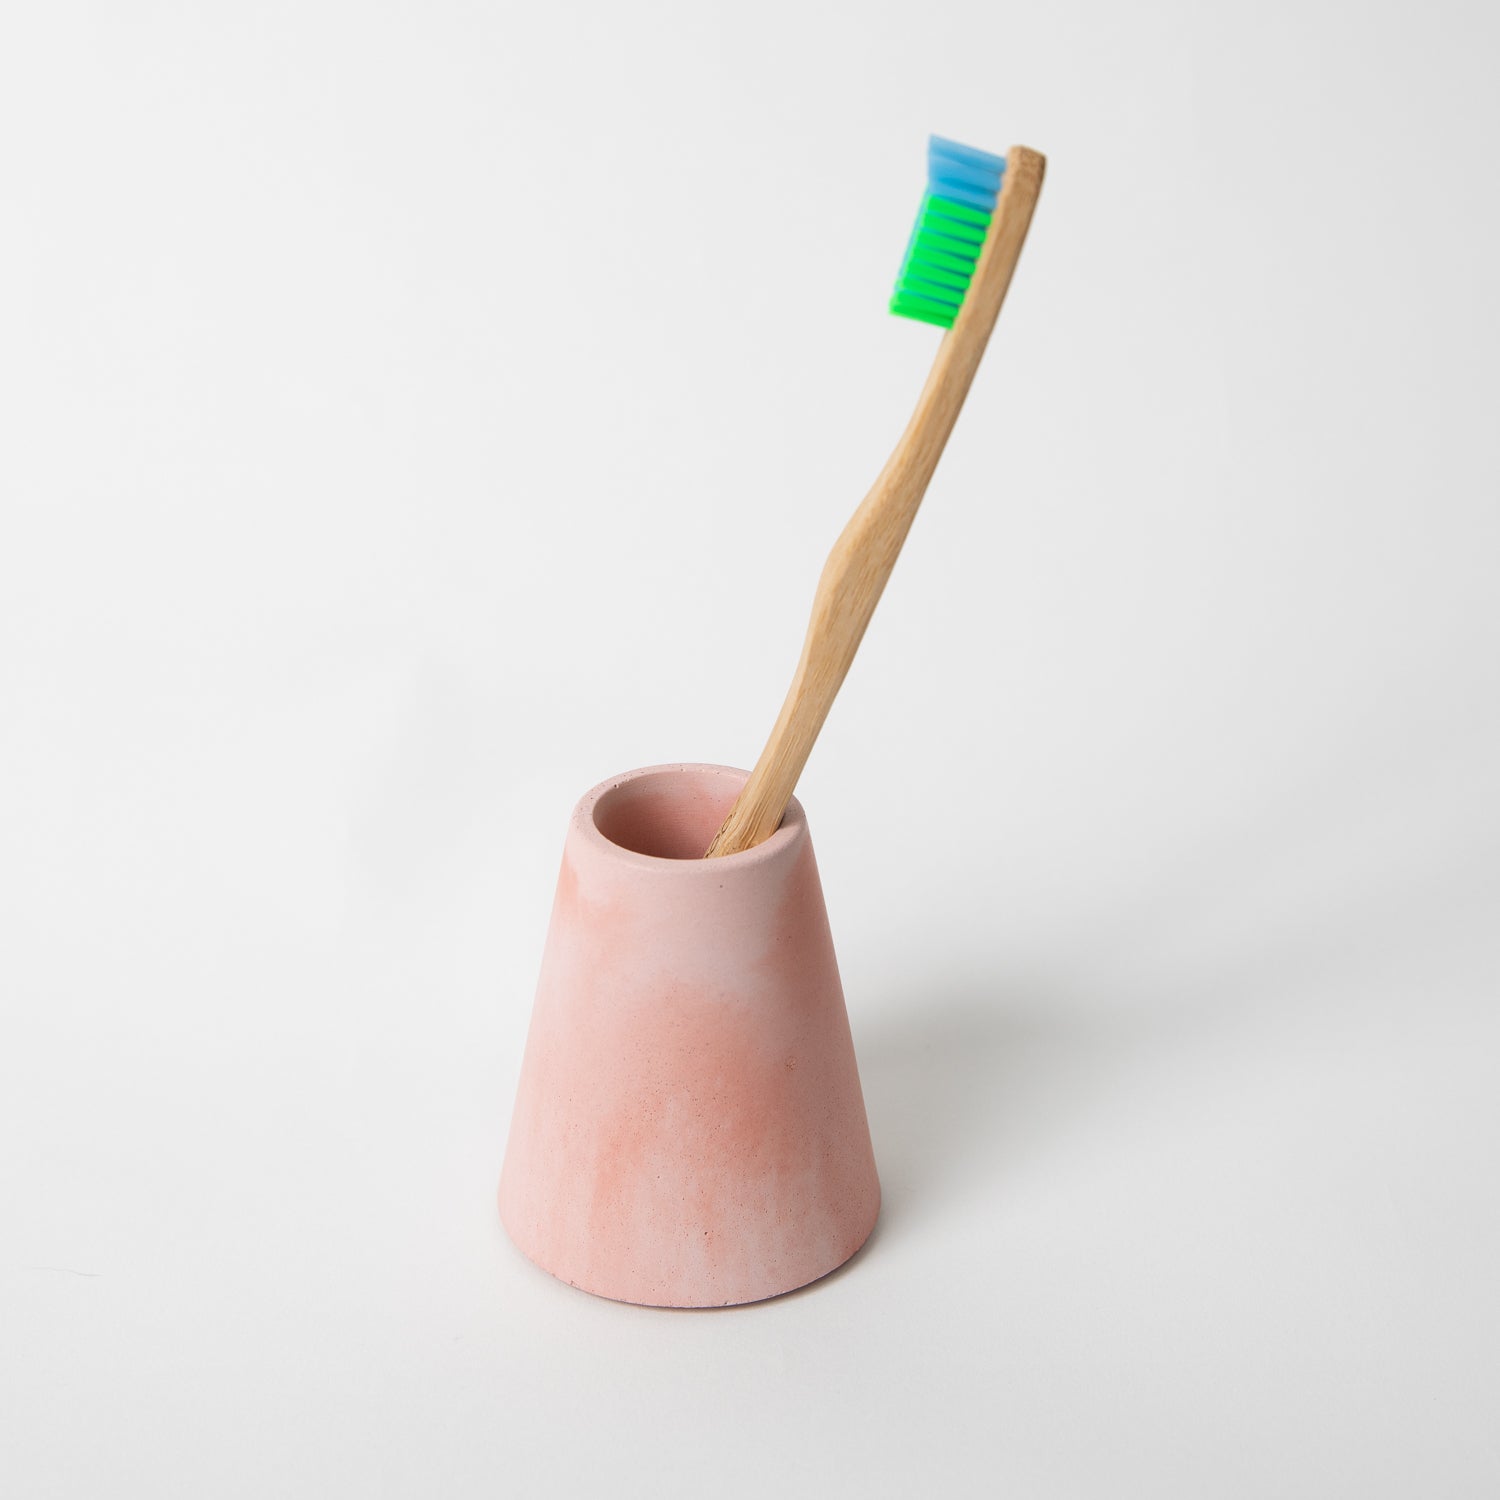 Concrete terrazzo toothbrush holder seen in pink and coral holding toothbrush.